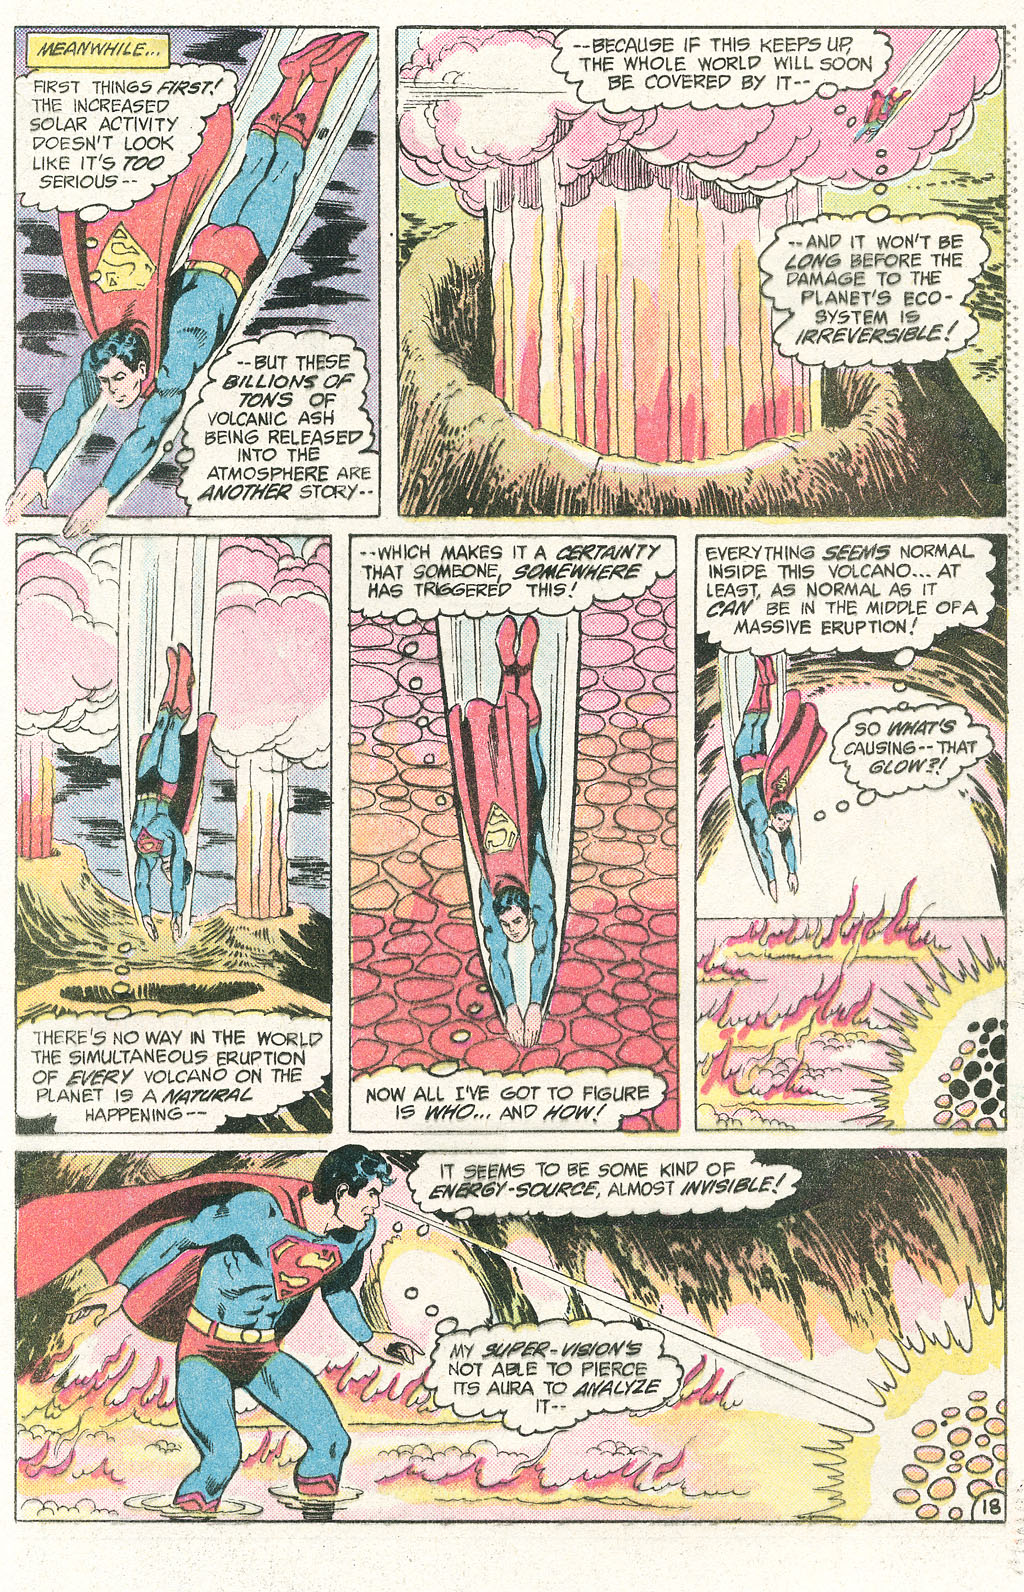 The New Adventures of Superboy 54 Page 24